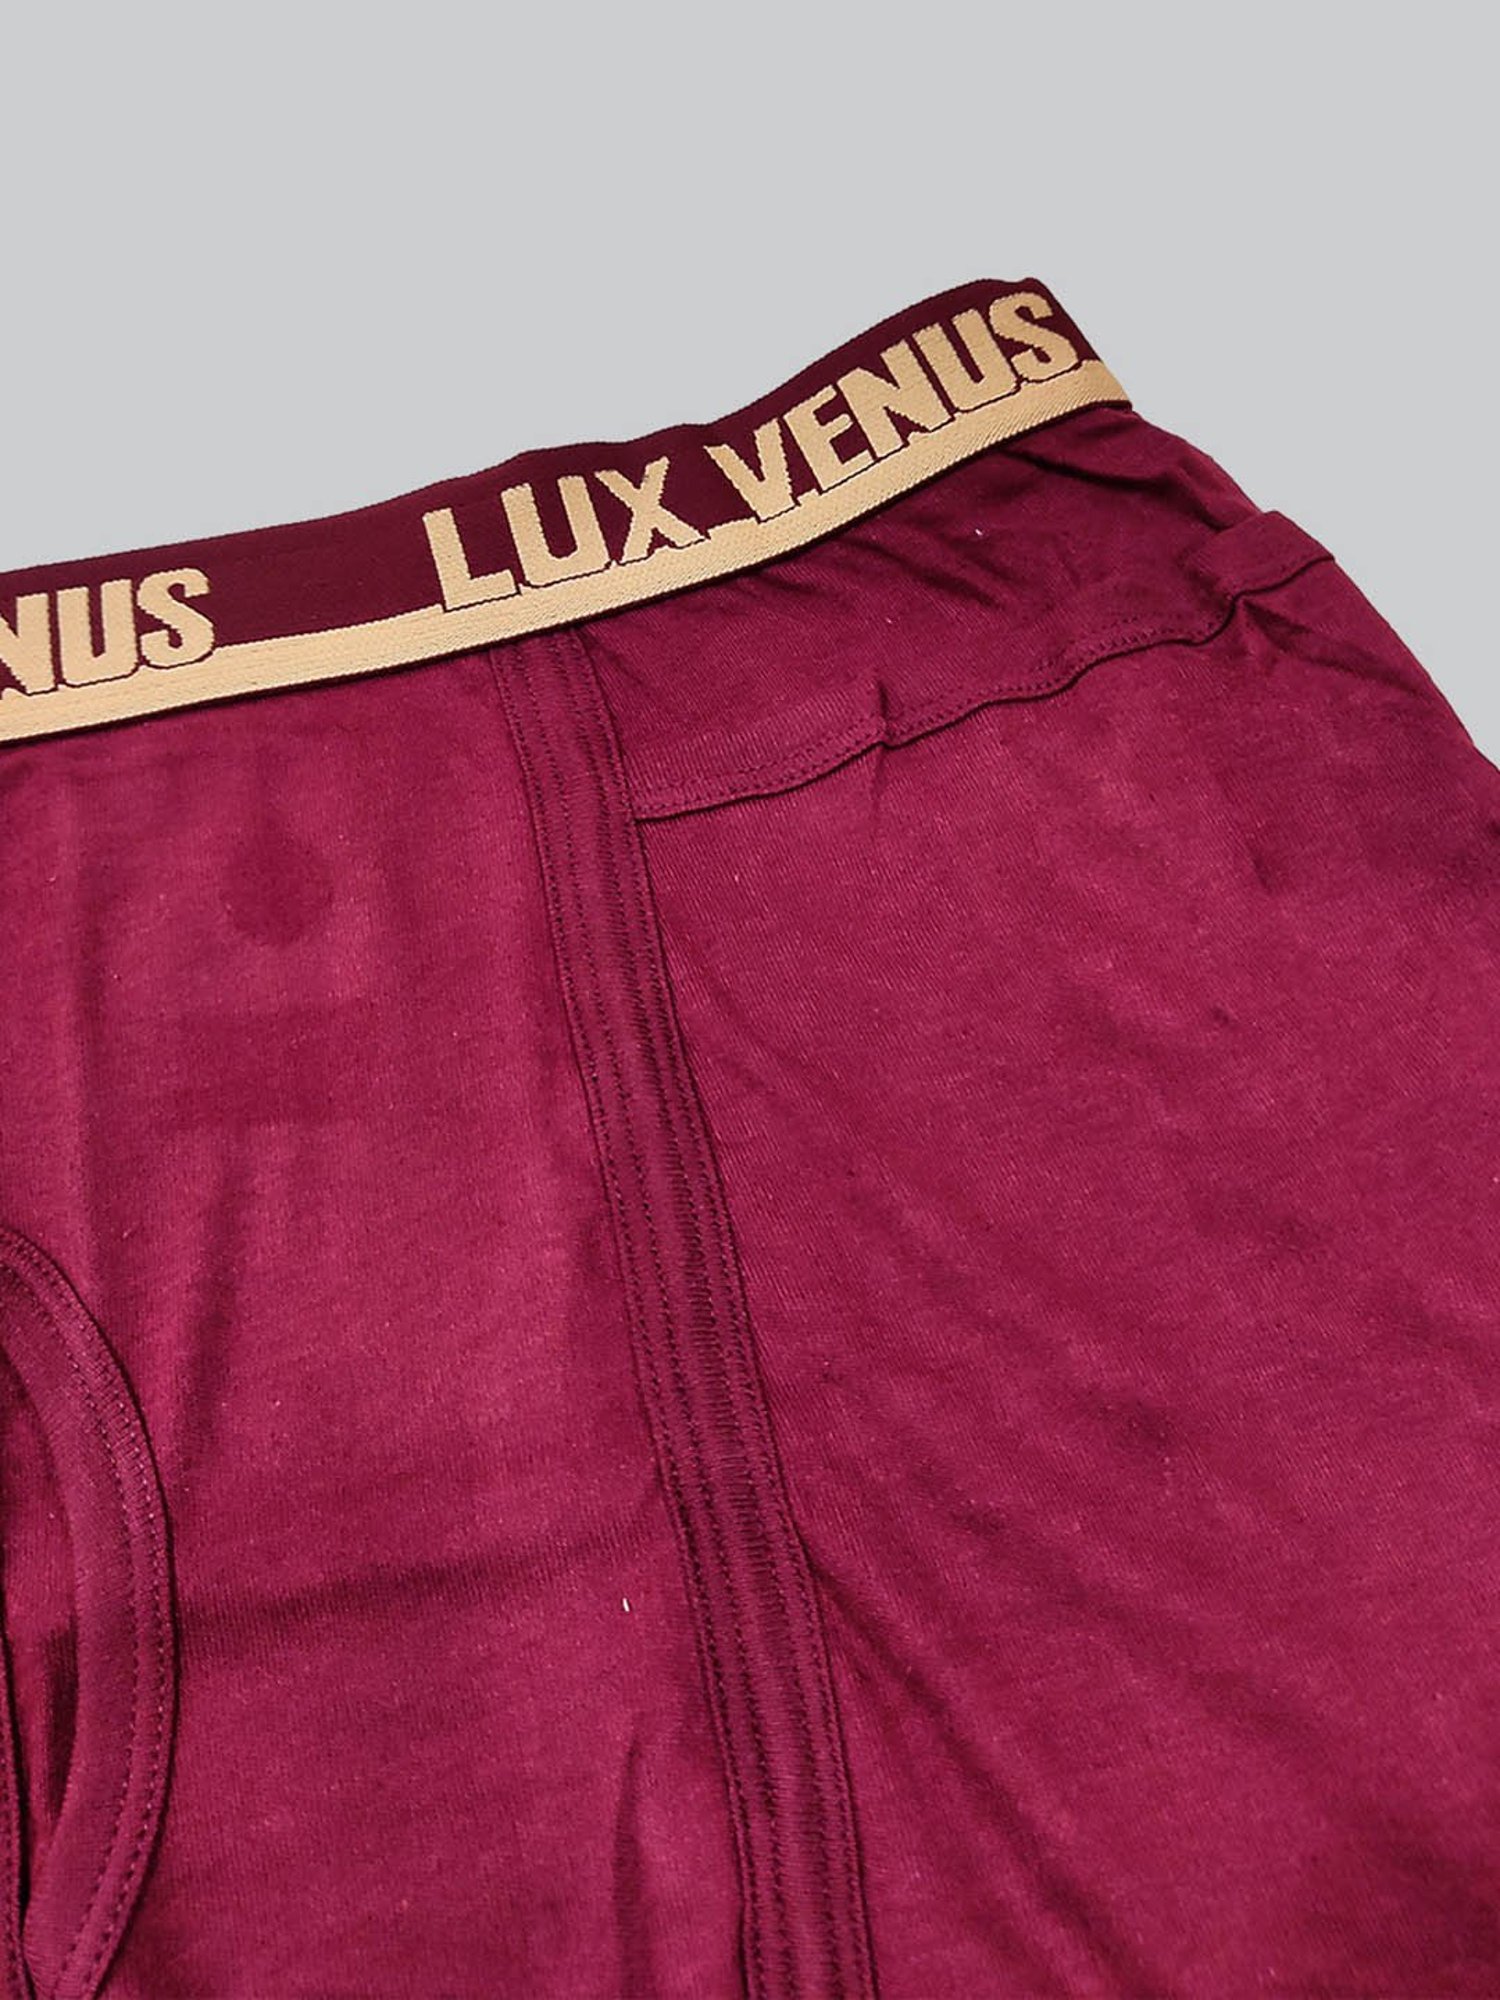 Buy Lux Venus Men's Assorted Solid 100% Cotton Pack of 2 Trunks